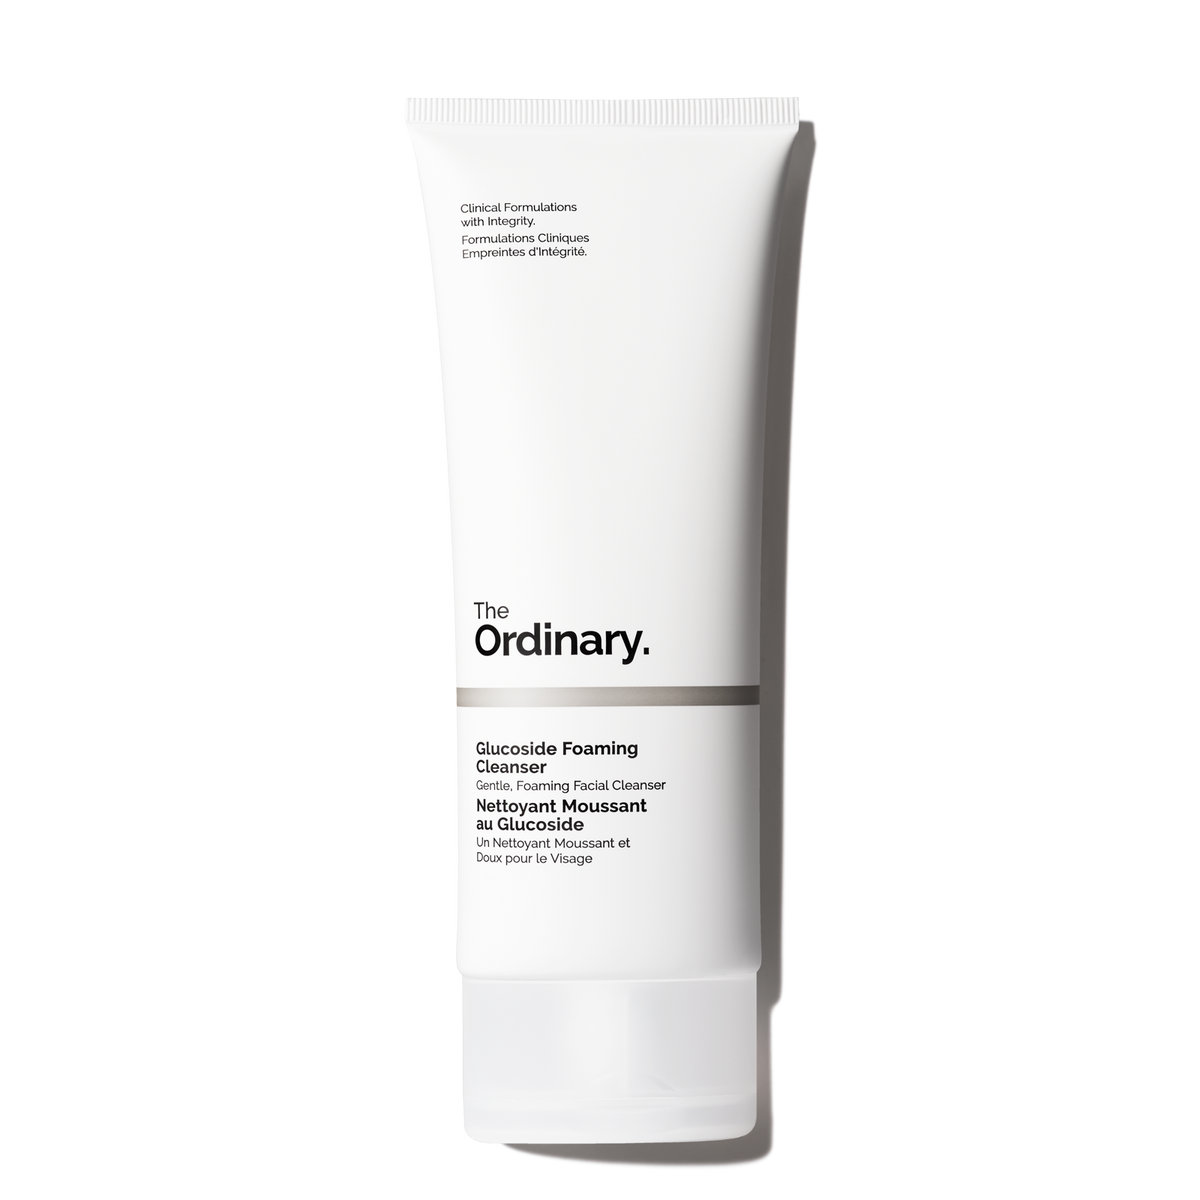 The ordinary Glucoside Foaming Cleanser